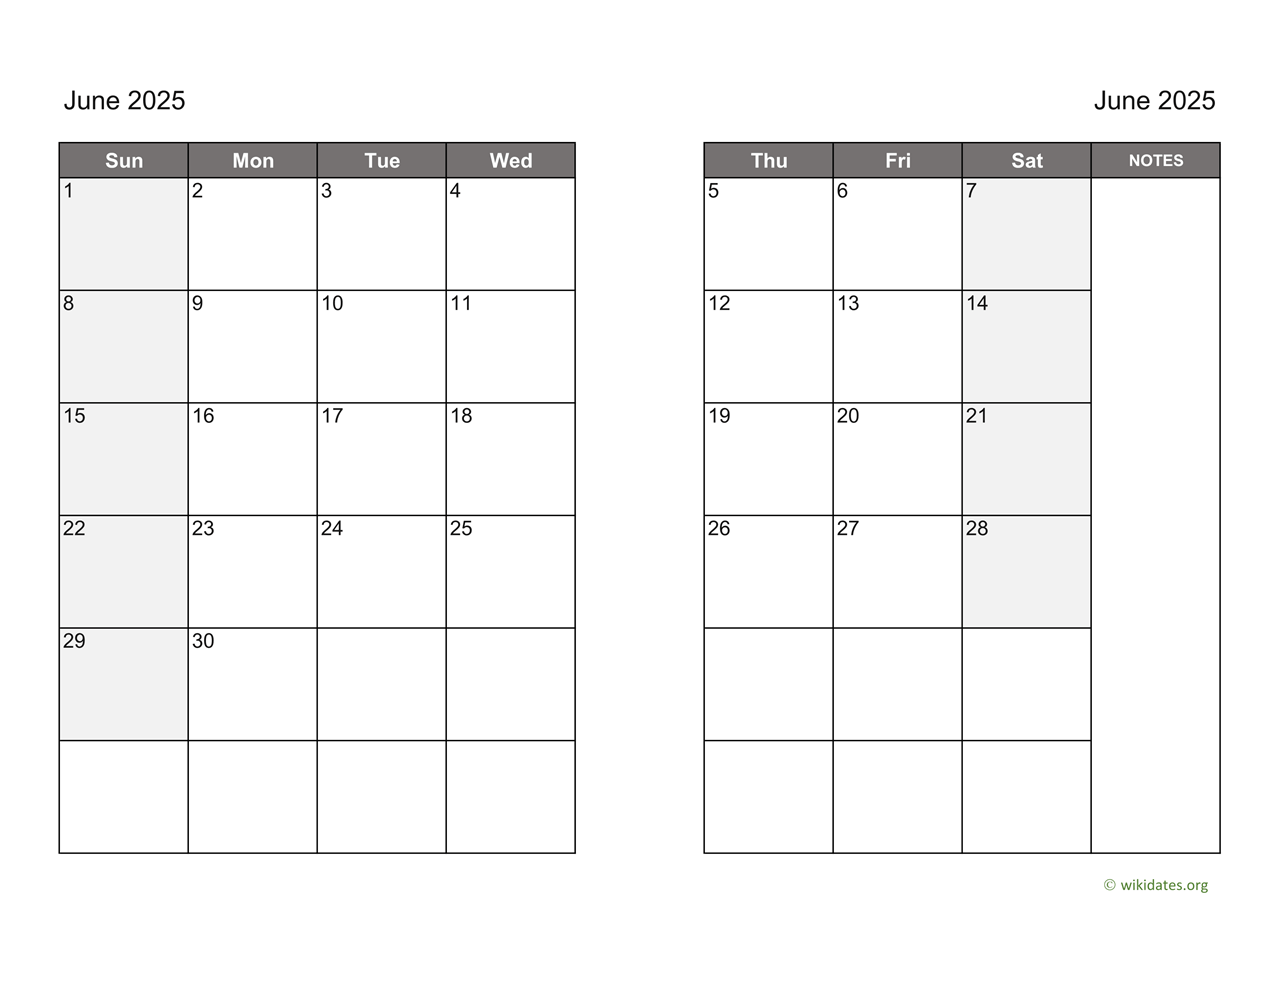 June 2025 Calendar on two pages